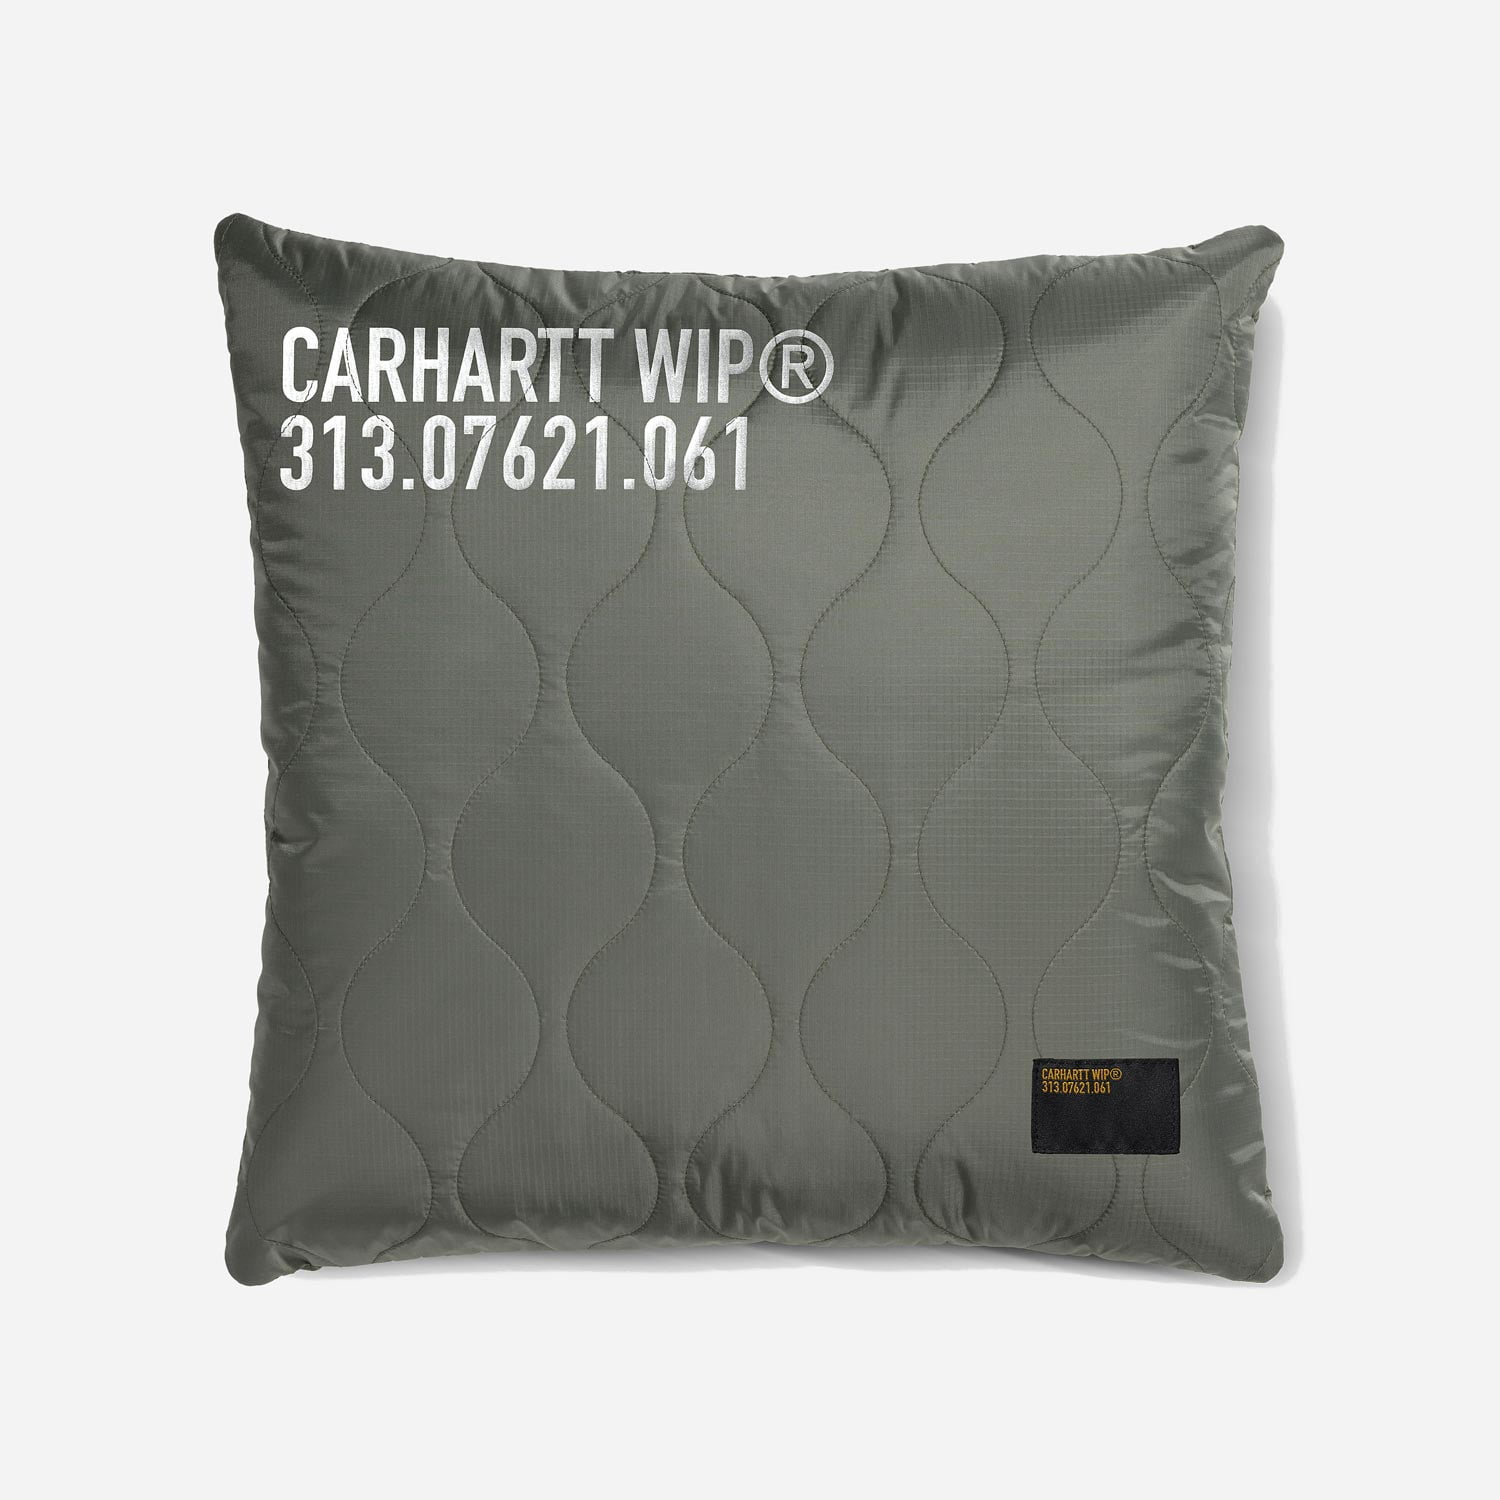 Carhartt WIP Tour Quilted Pillow - Smoke Green/Reflective